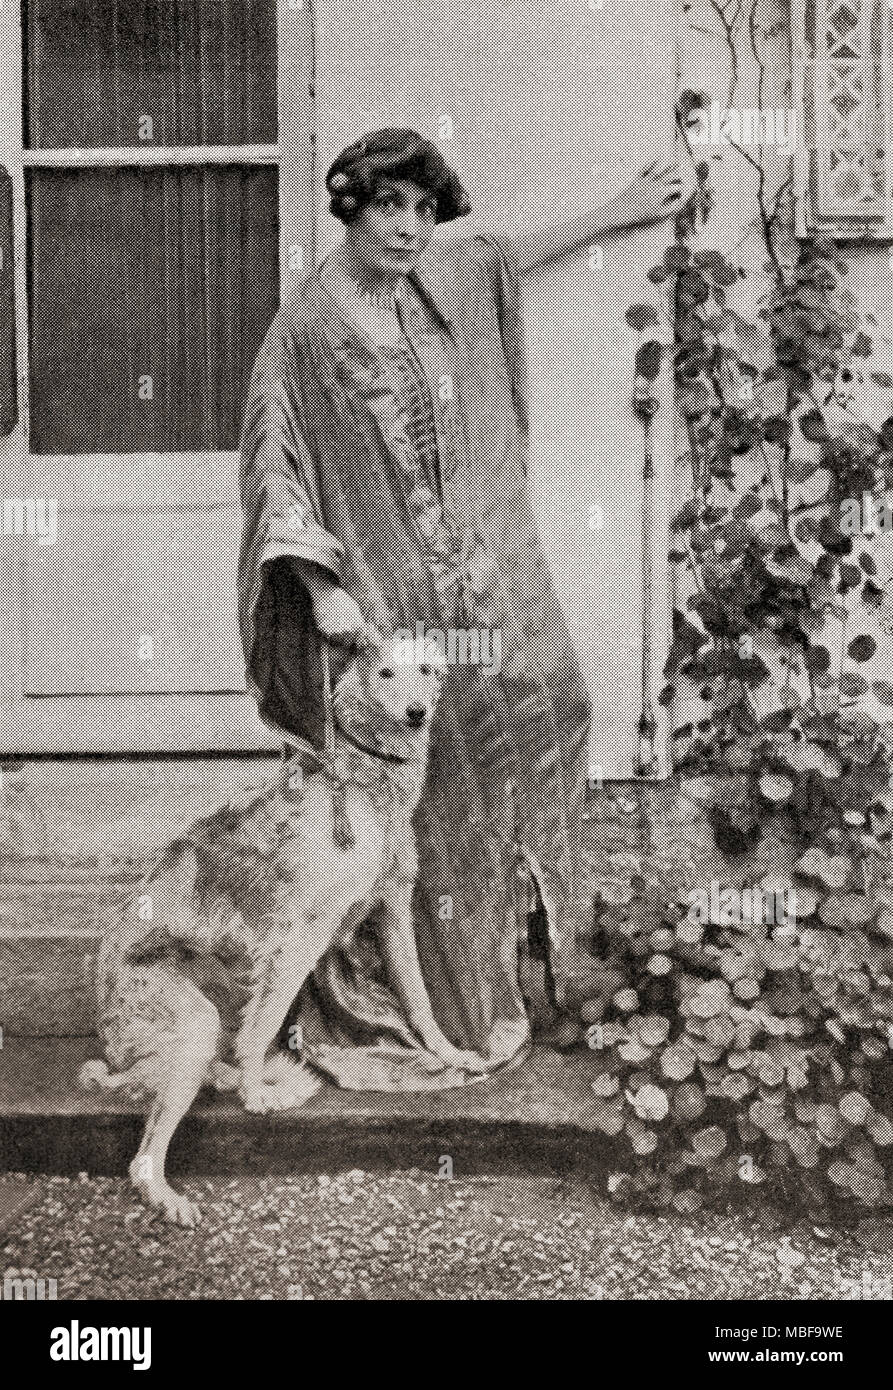 Myriam Harry.  Myriam Harry was the pen name of Maria Rosette Shapira, 1869 or 1875 – 1958.  French journalist and writer.  From La Divina Cancion, published c.1931. Stock Photo